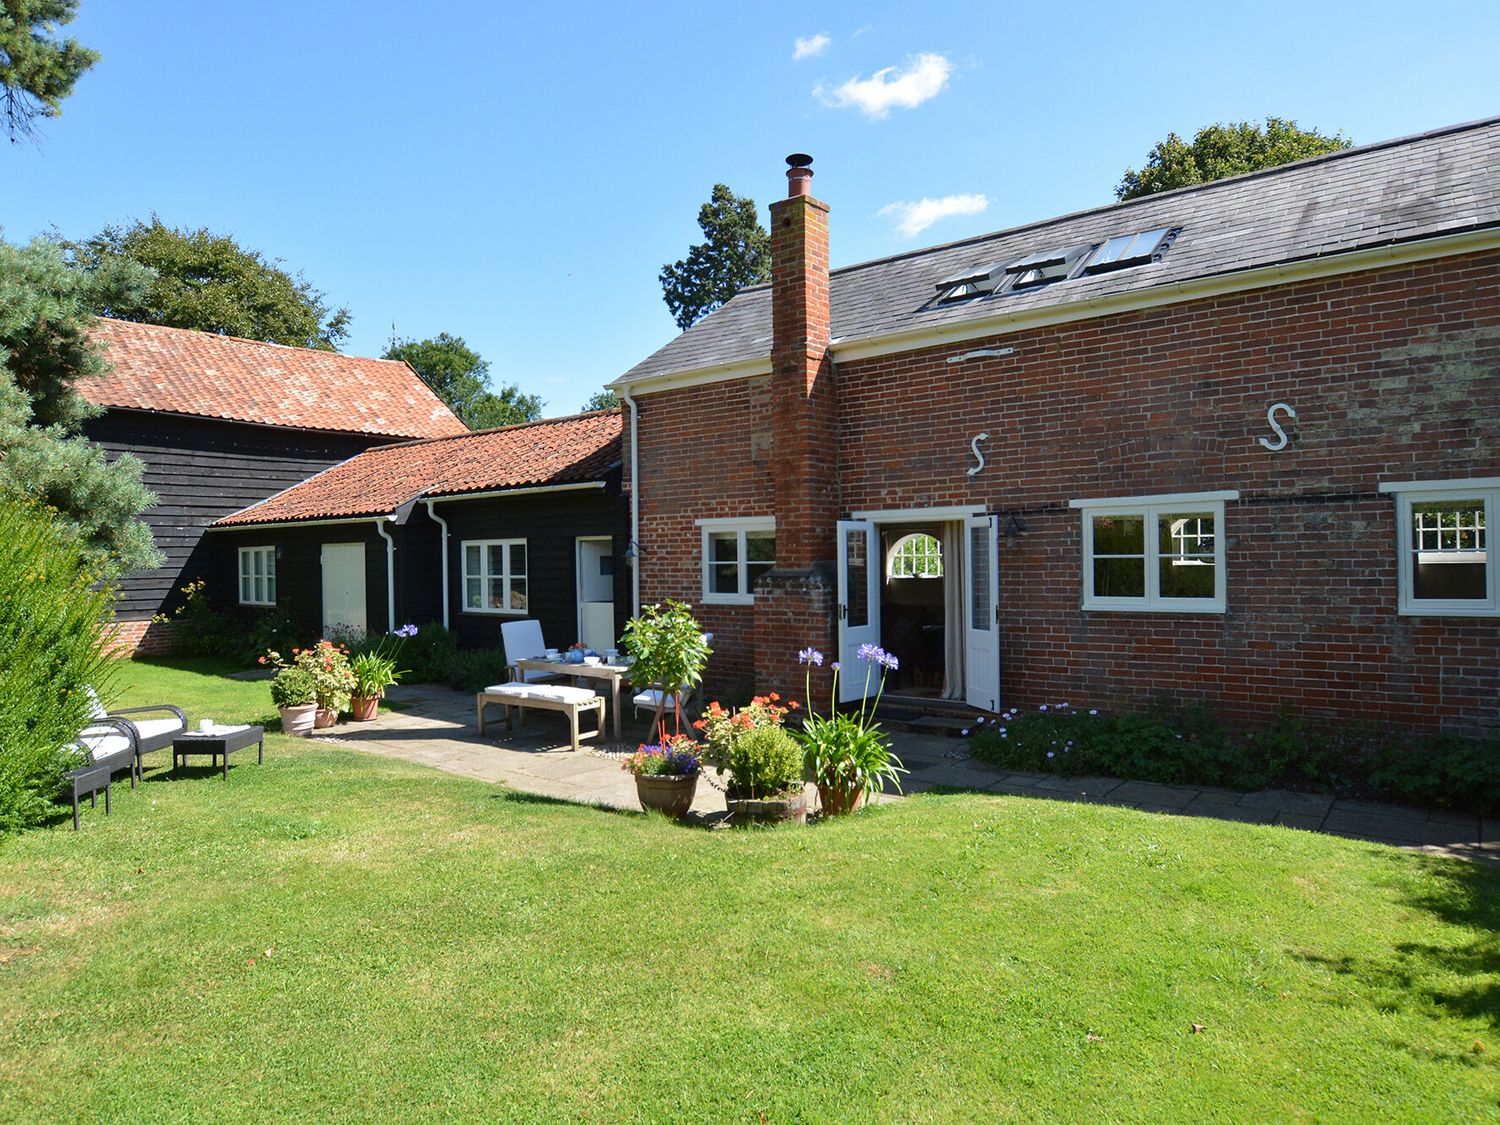 Stable Cottage at the Grove, Great Glemham - Suffolk & Essex - 1117135 - photo 1